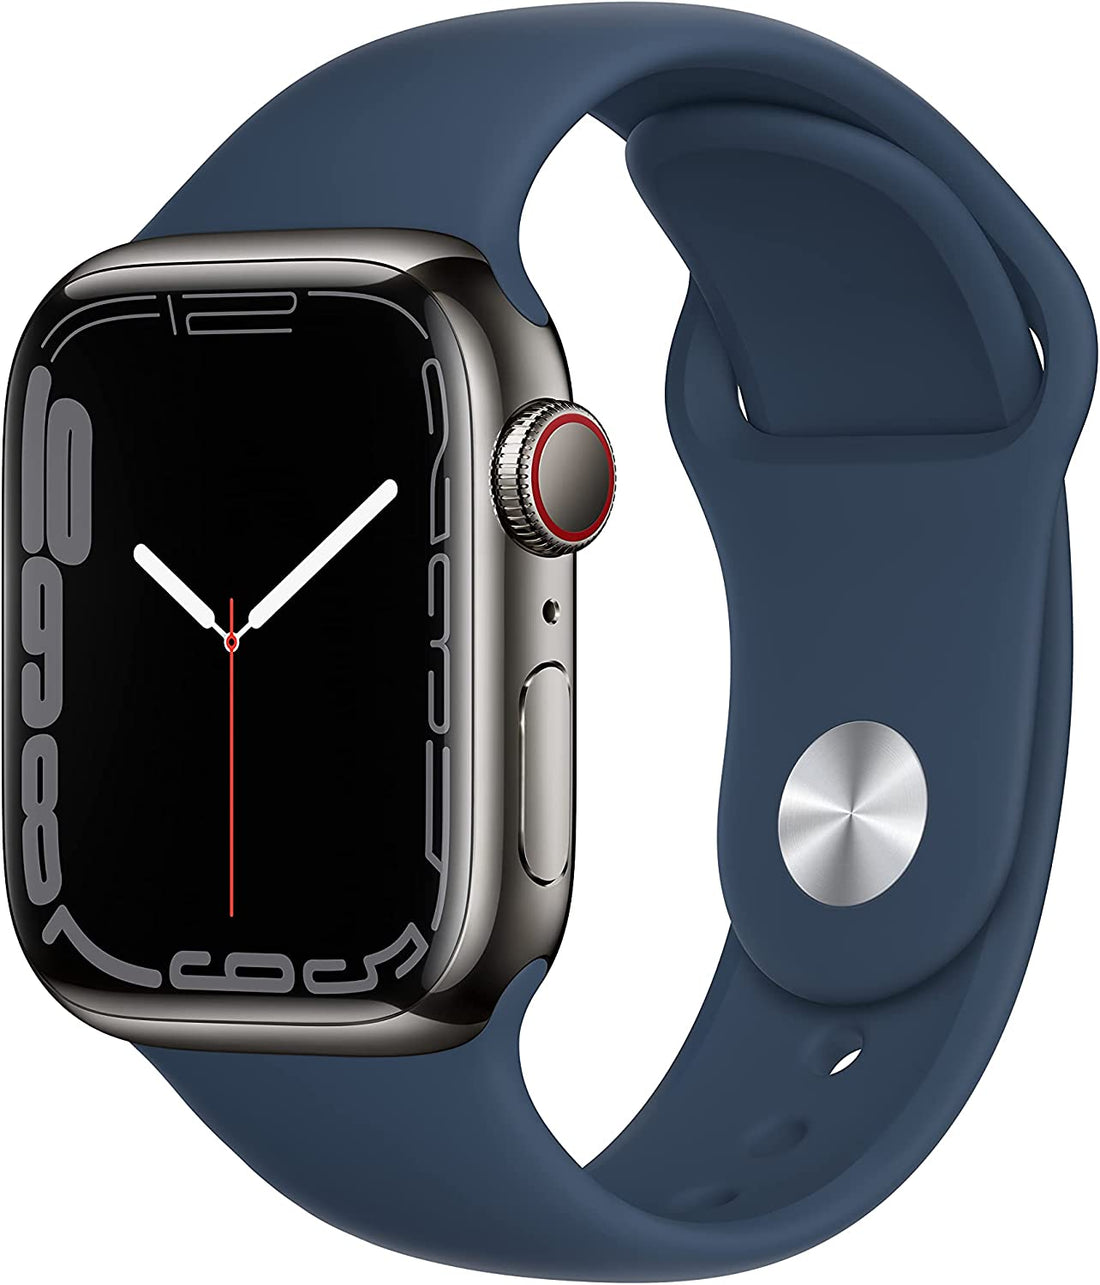 Apple Watch Series 7 (2021) 41mm GPS + Cellular - Graphite Stainless Steel Case &amp; Blue Sport Band (Refurbished)